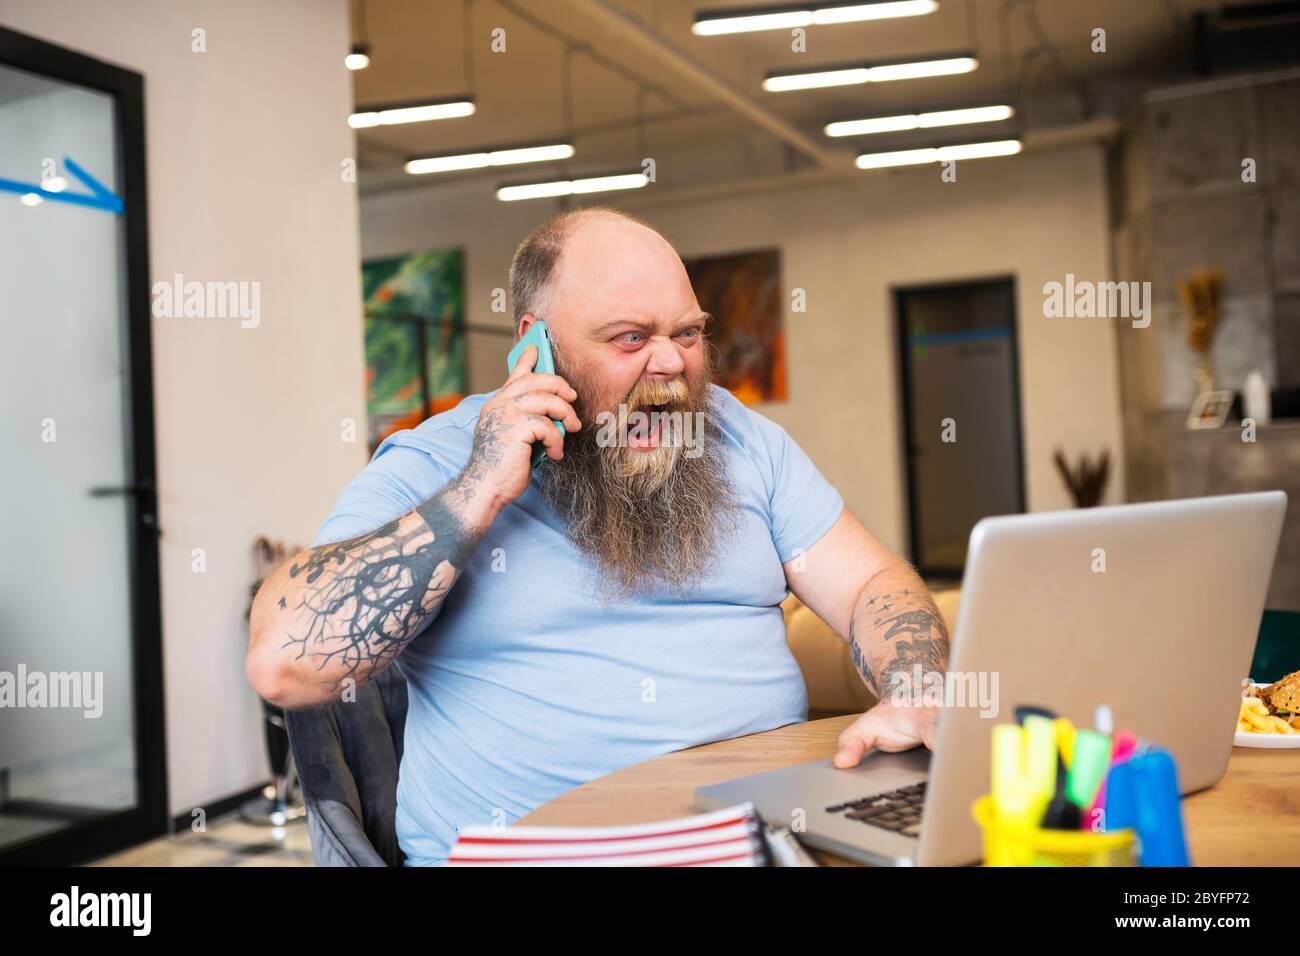 Bald man talking on the phone and looking angry Stock Photo